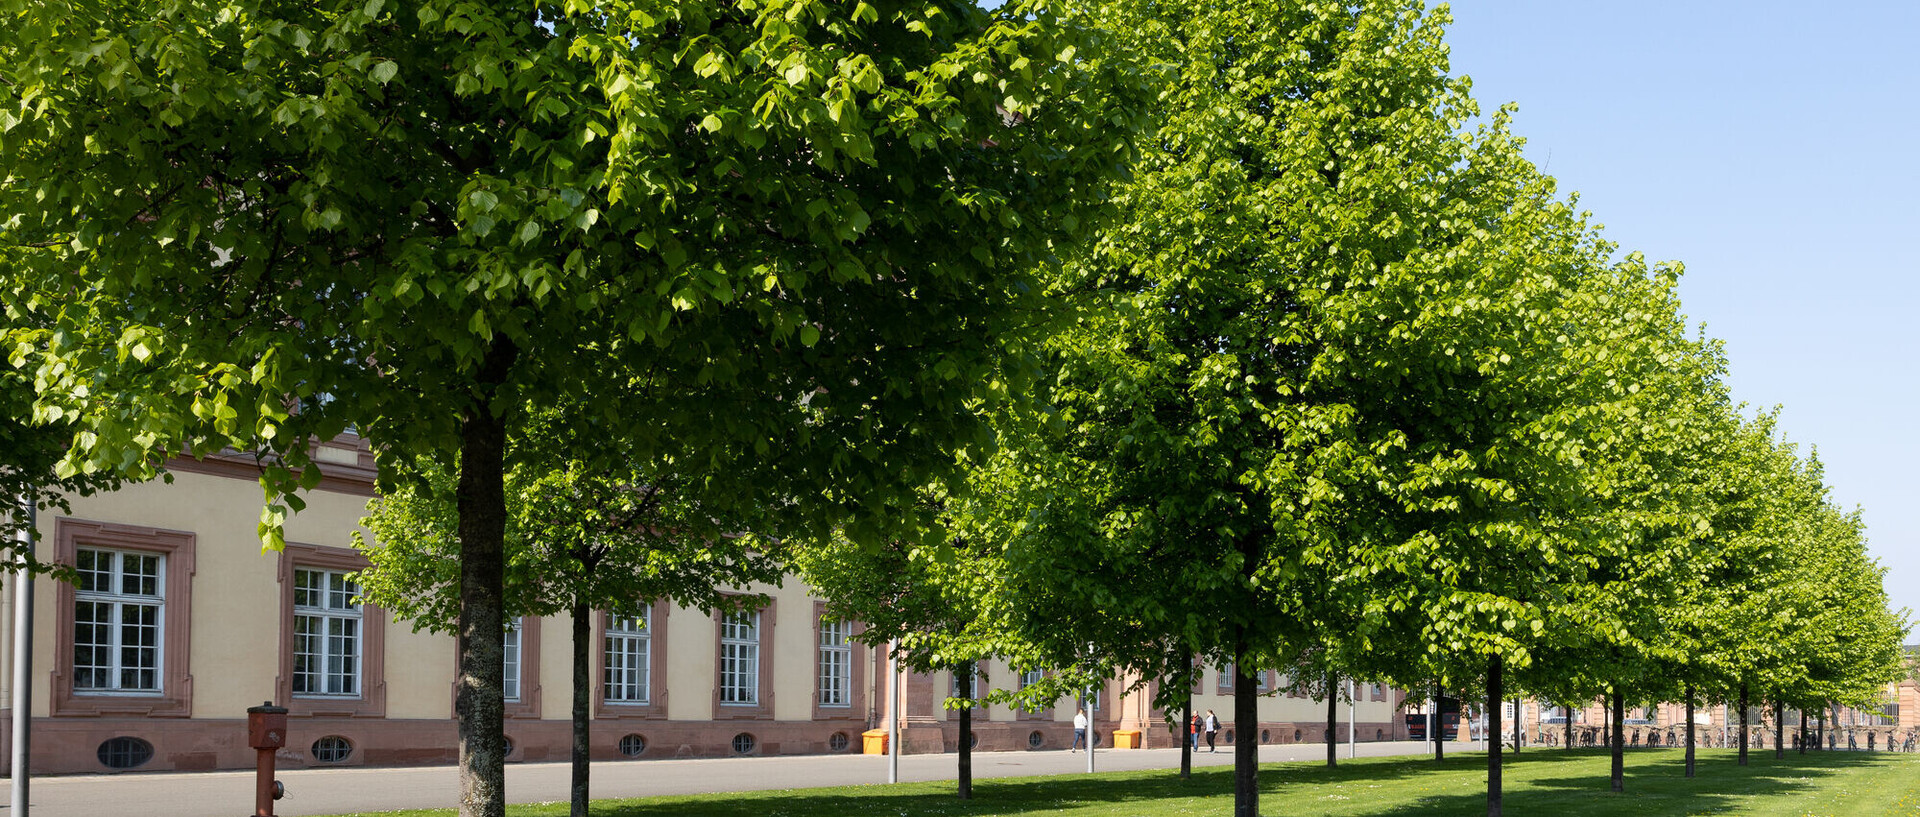 Row of trees and green space in front of the university building